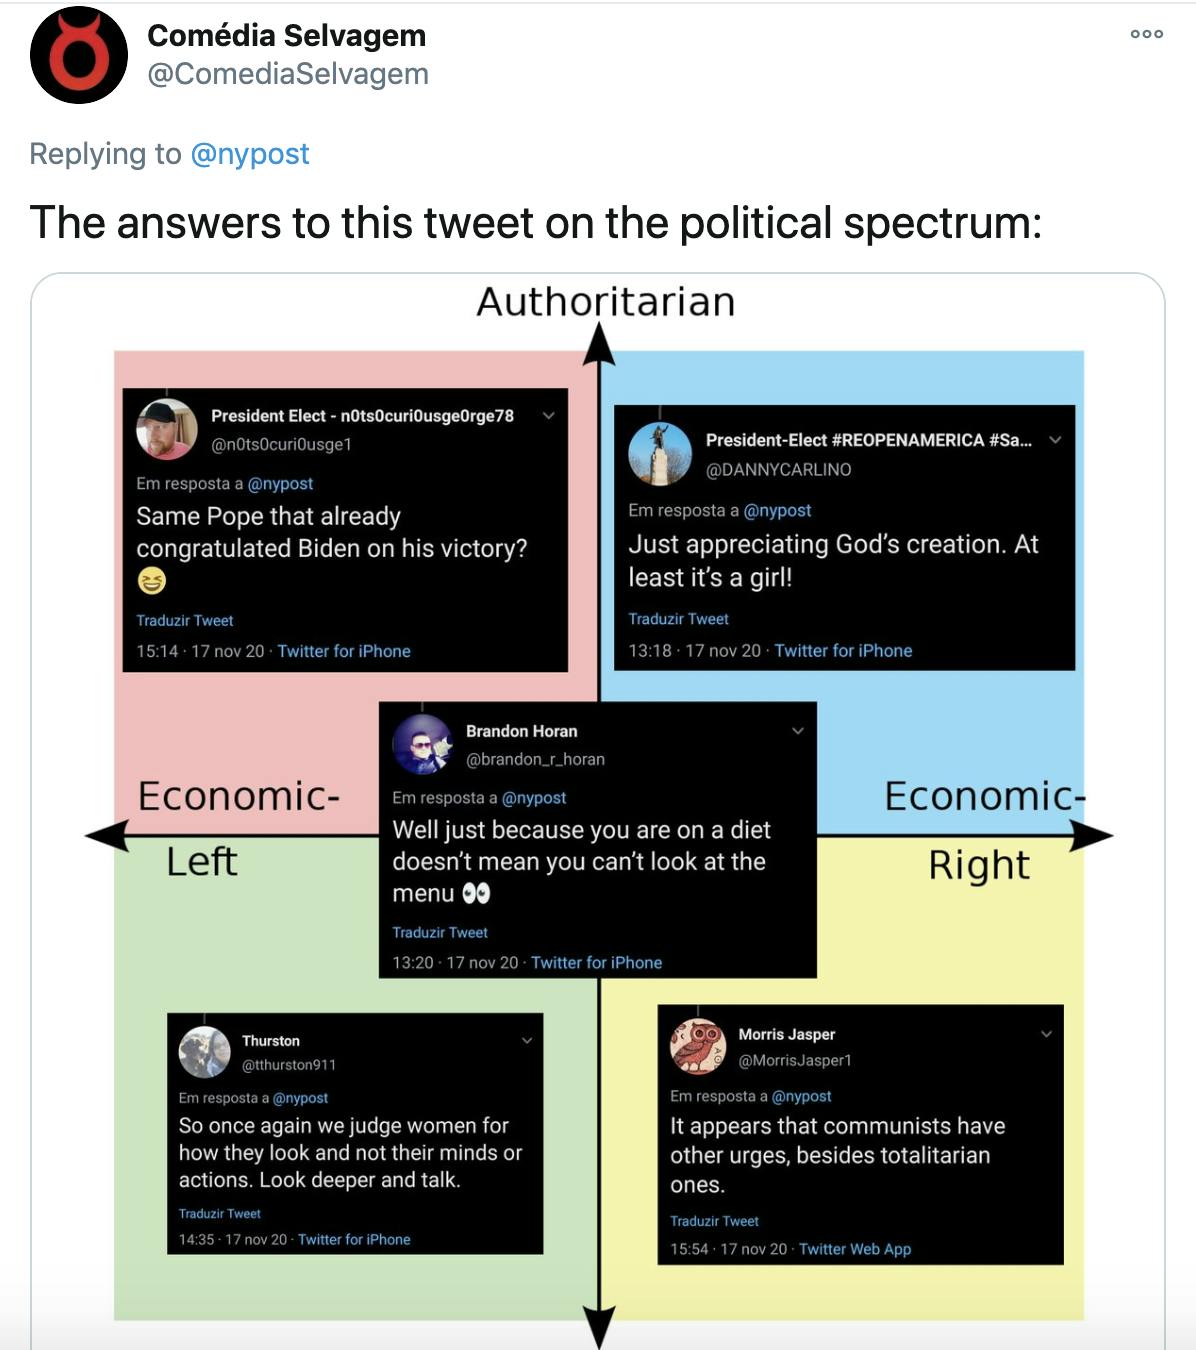 'The answers to this tweet on the political spectrum:' Political compass with 'Same pope who already congratulated Biden on his victory' on the authoritarian left, 'So once again we judge women by what they look like and not their minds or actions? Look deeper and talk' on the libertarian left, 'it appears that communists have other urges besides totalitarian ones' on the libertarian right, 'Just appreciating god's creation, at least it's a girl' on the authoritarian right and 'well just because you are on a diet doesn't mean you can't look at the menu' in the centre